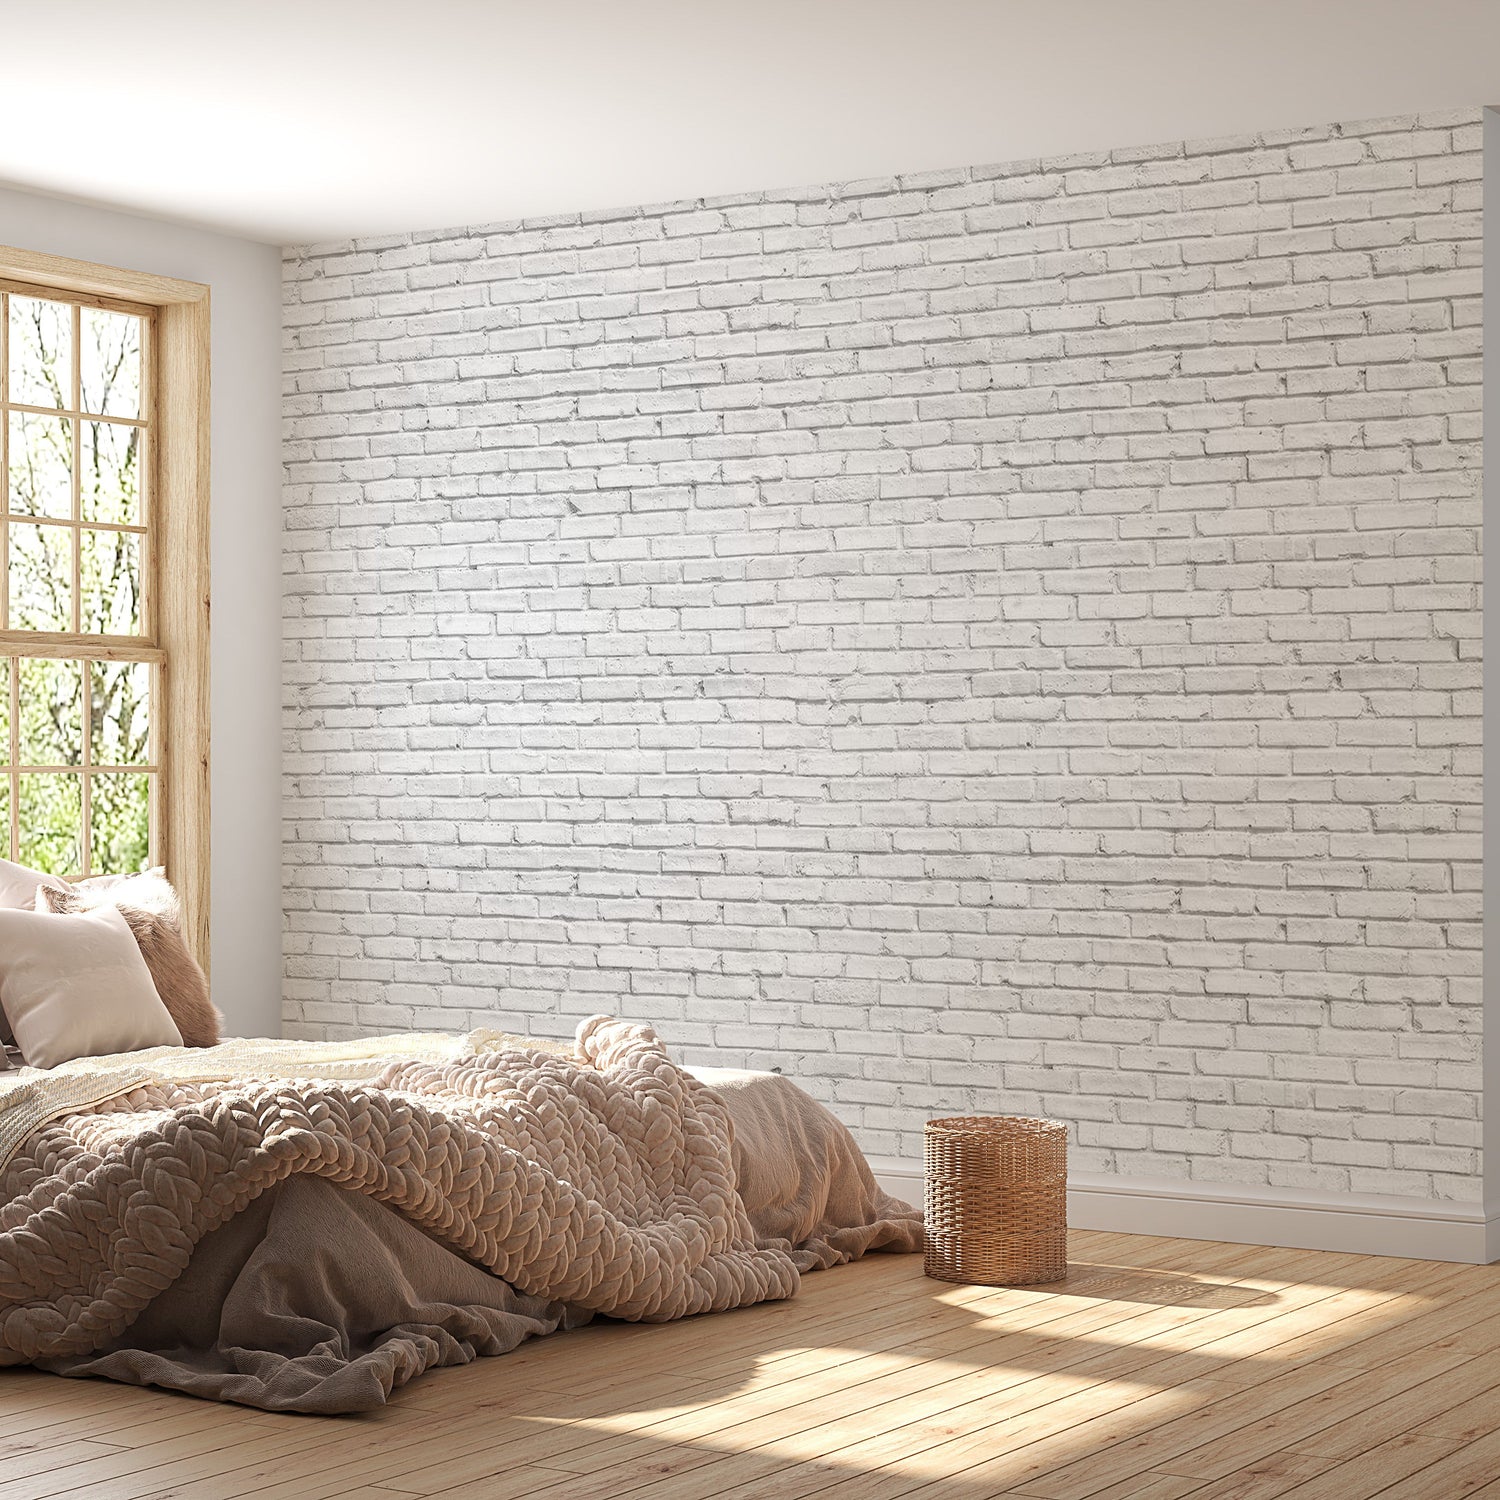 Peel & Stick Wall Mural - Small White Grey Bricks - Removable Wall Decals